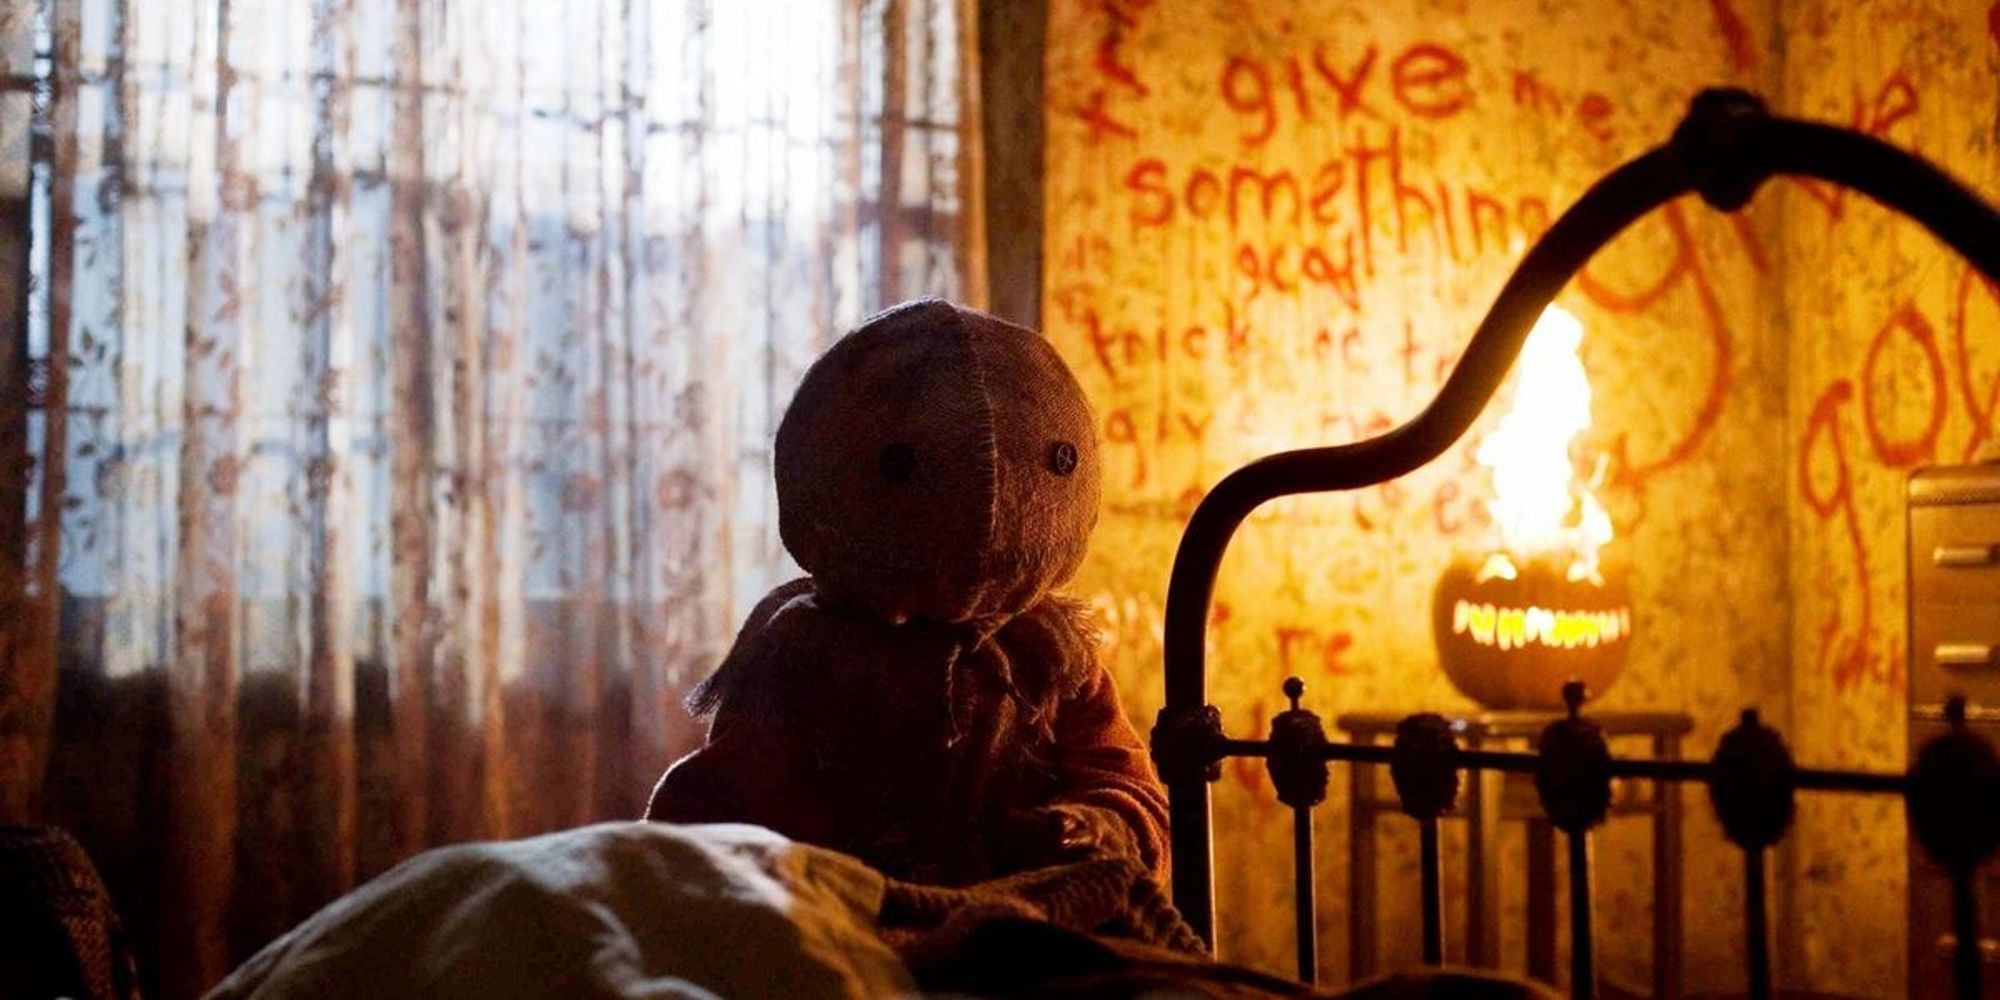 Sam, a child with a burlap sack over his head in a spooky room from Trick r Treat.